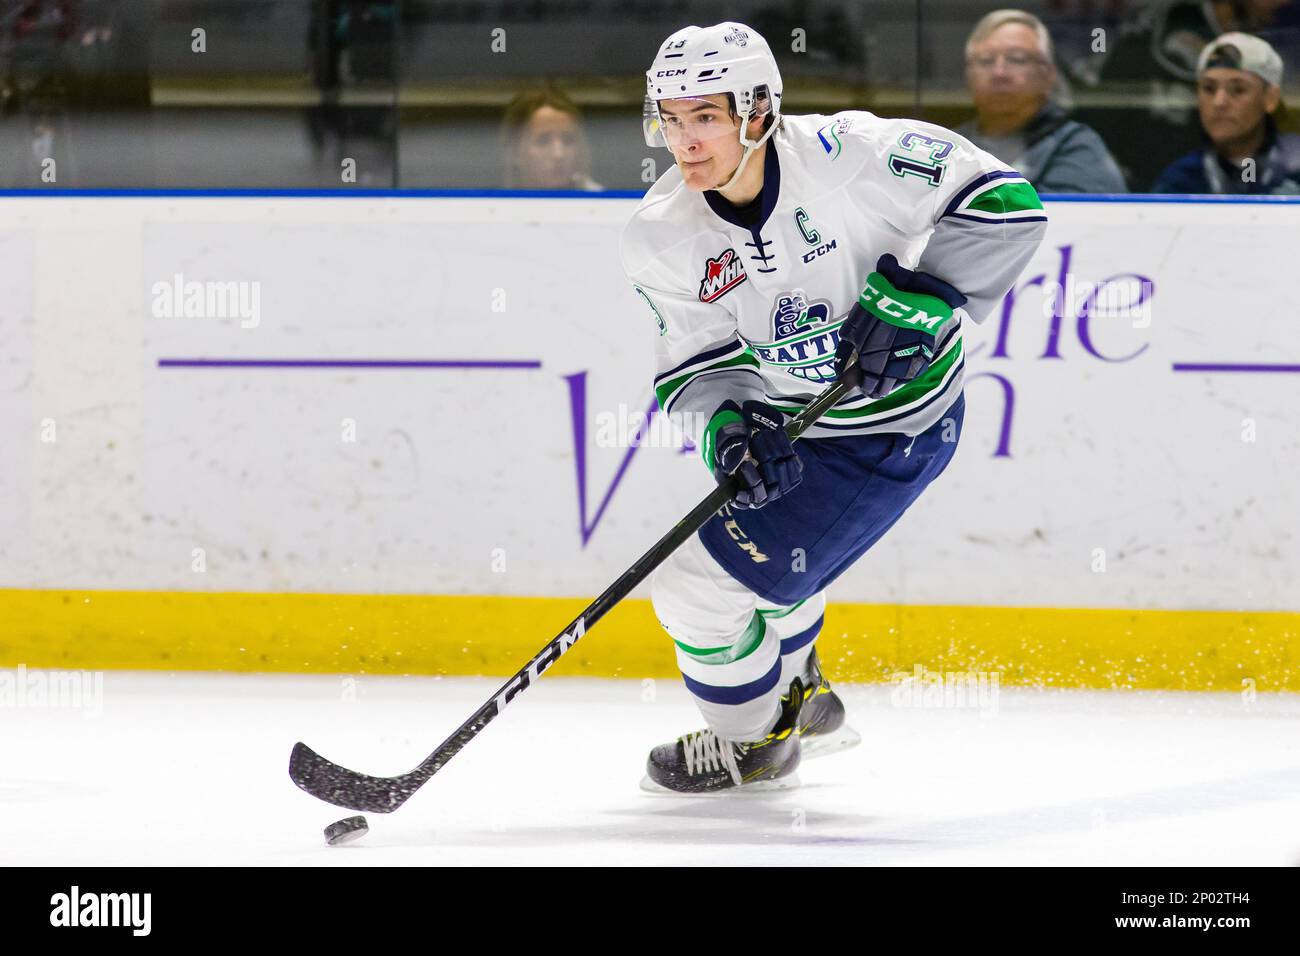 Seattle Thunderbirds sweep Everett Silvertips in 2nd round of WHL playoffs